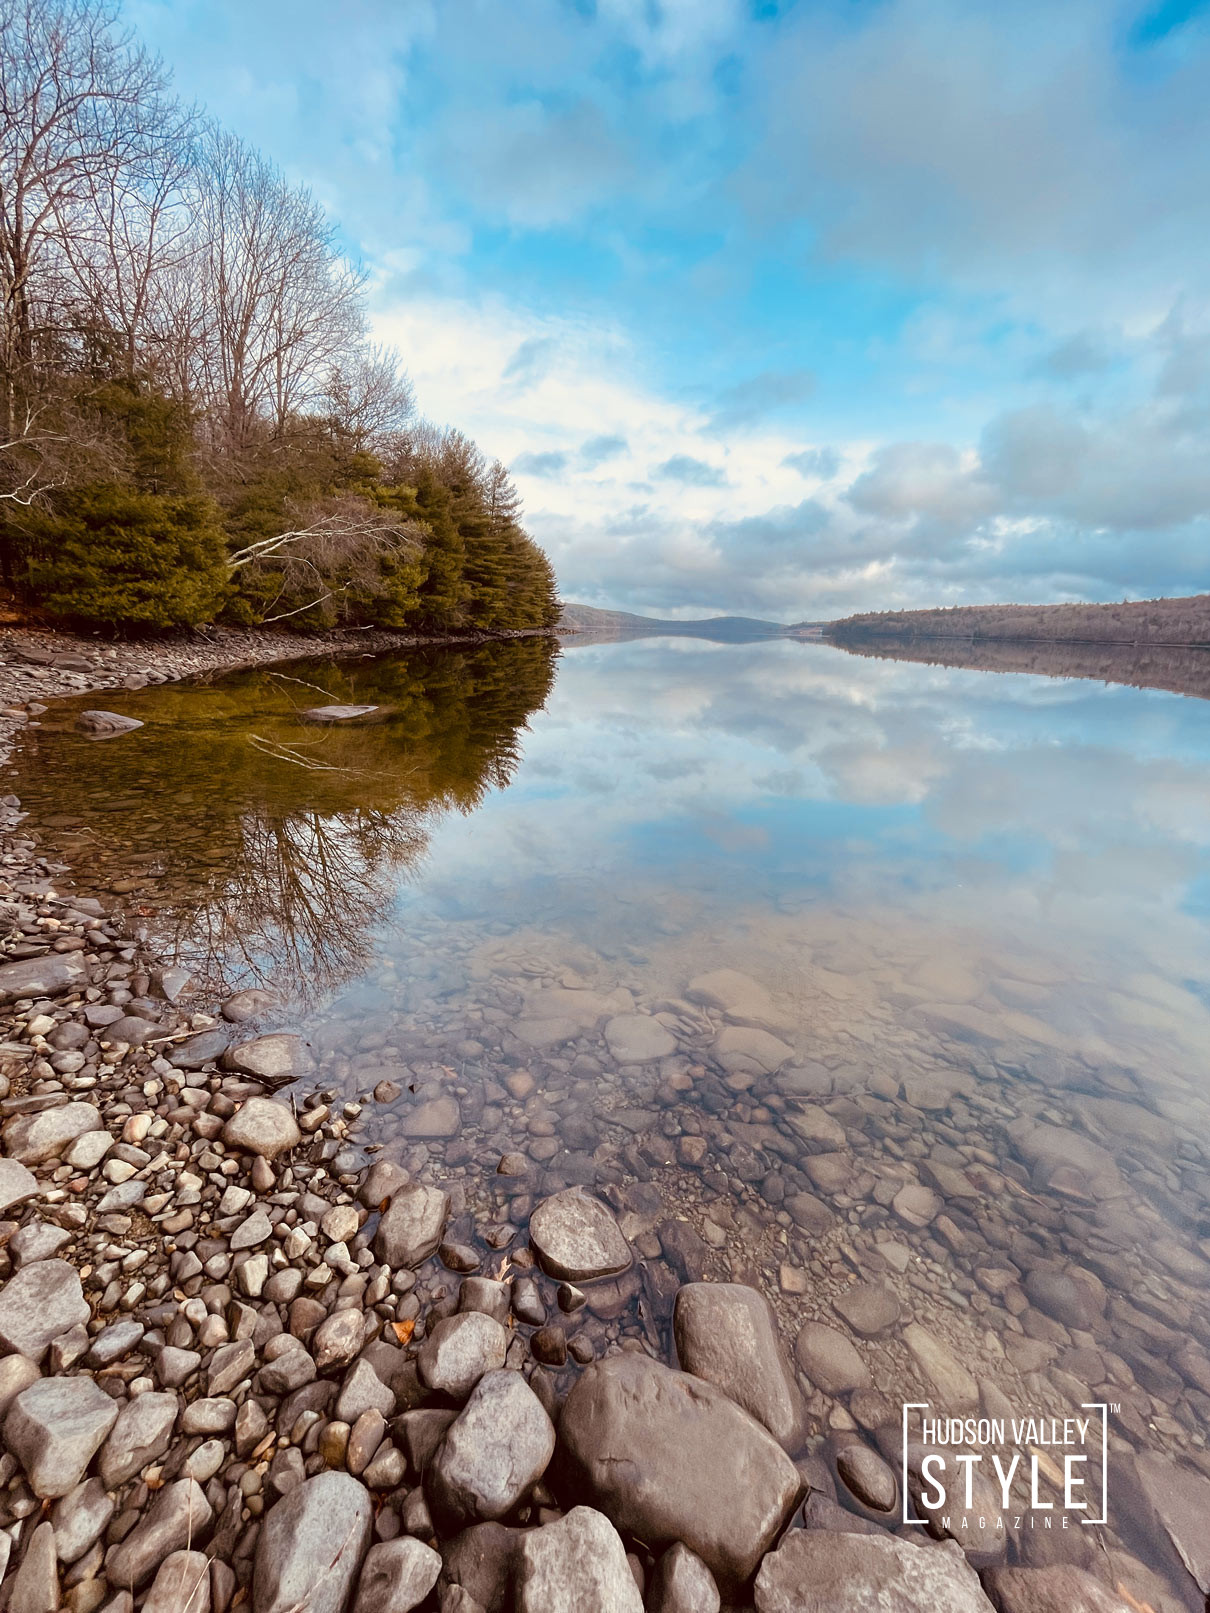 Roundout Reservoir in Catskill Mountains – Photo Story by Maxwell Alexander – Nature photography – Canvas Photo Prints – Wall Art